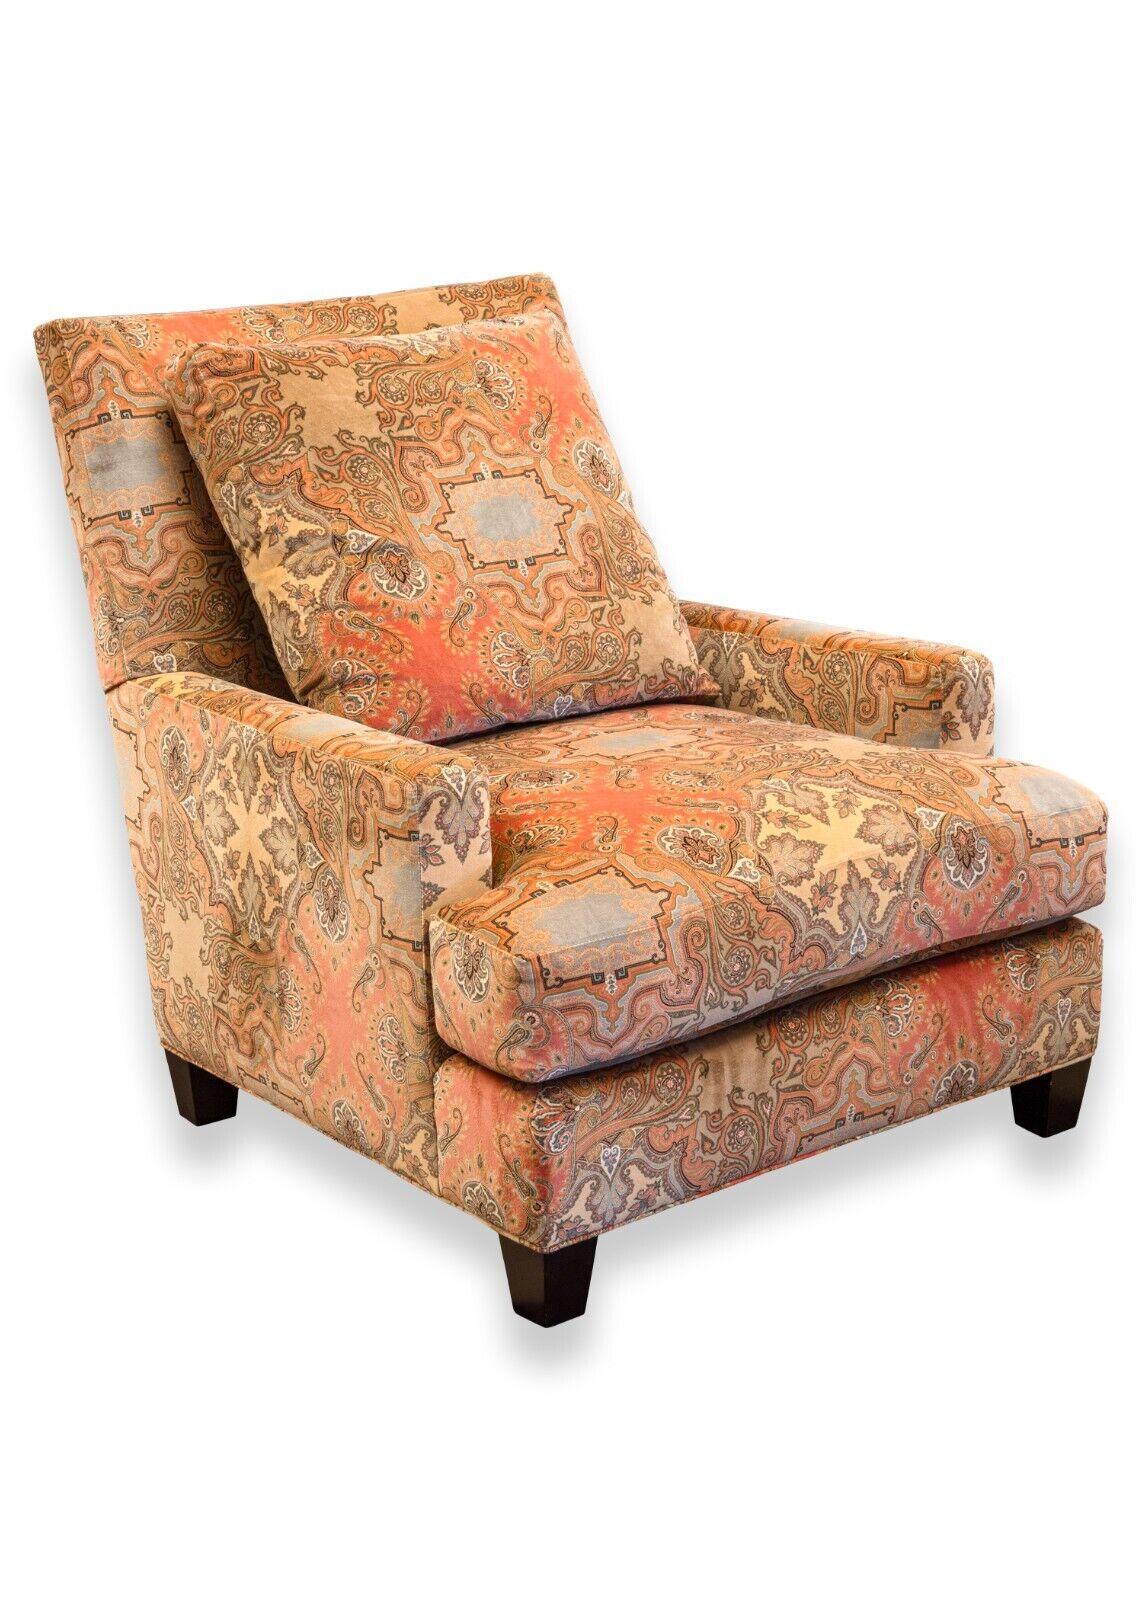 A Baker contemporary paisley upholstered armchair & ottoman. This is a magnificent armchair from furniture designer Baker. This piece is dressed in a lovely and eclectic paisley patterning. The paisley covers both the armchair and ottoman from head